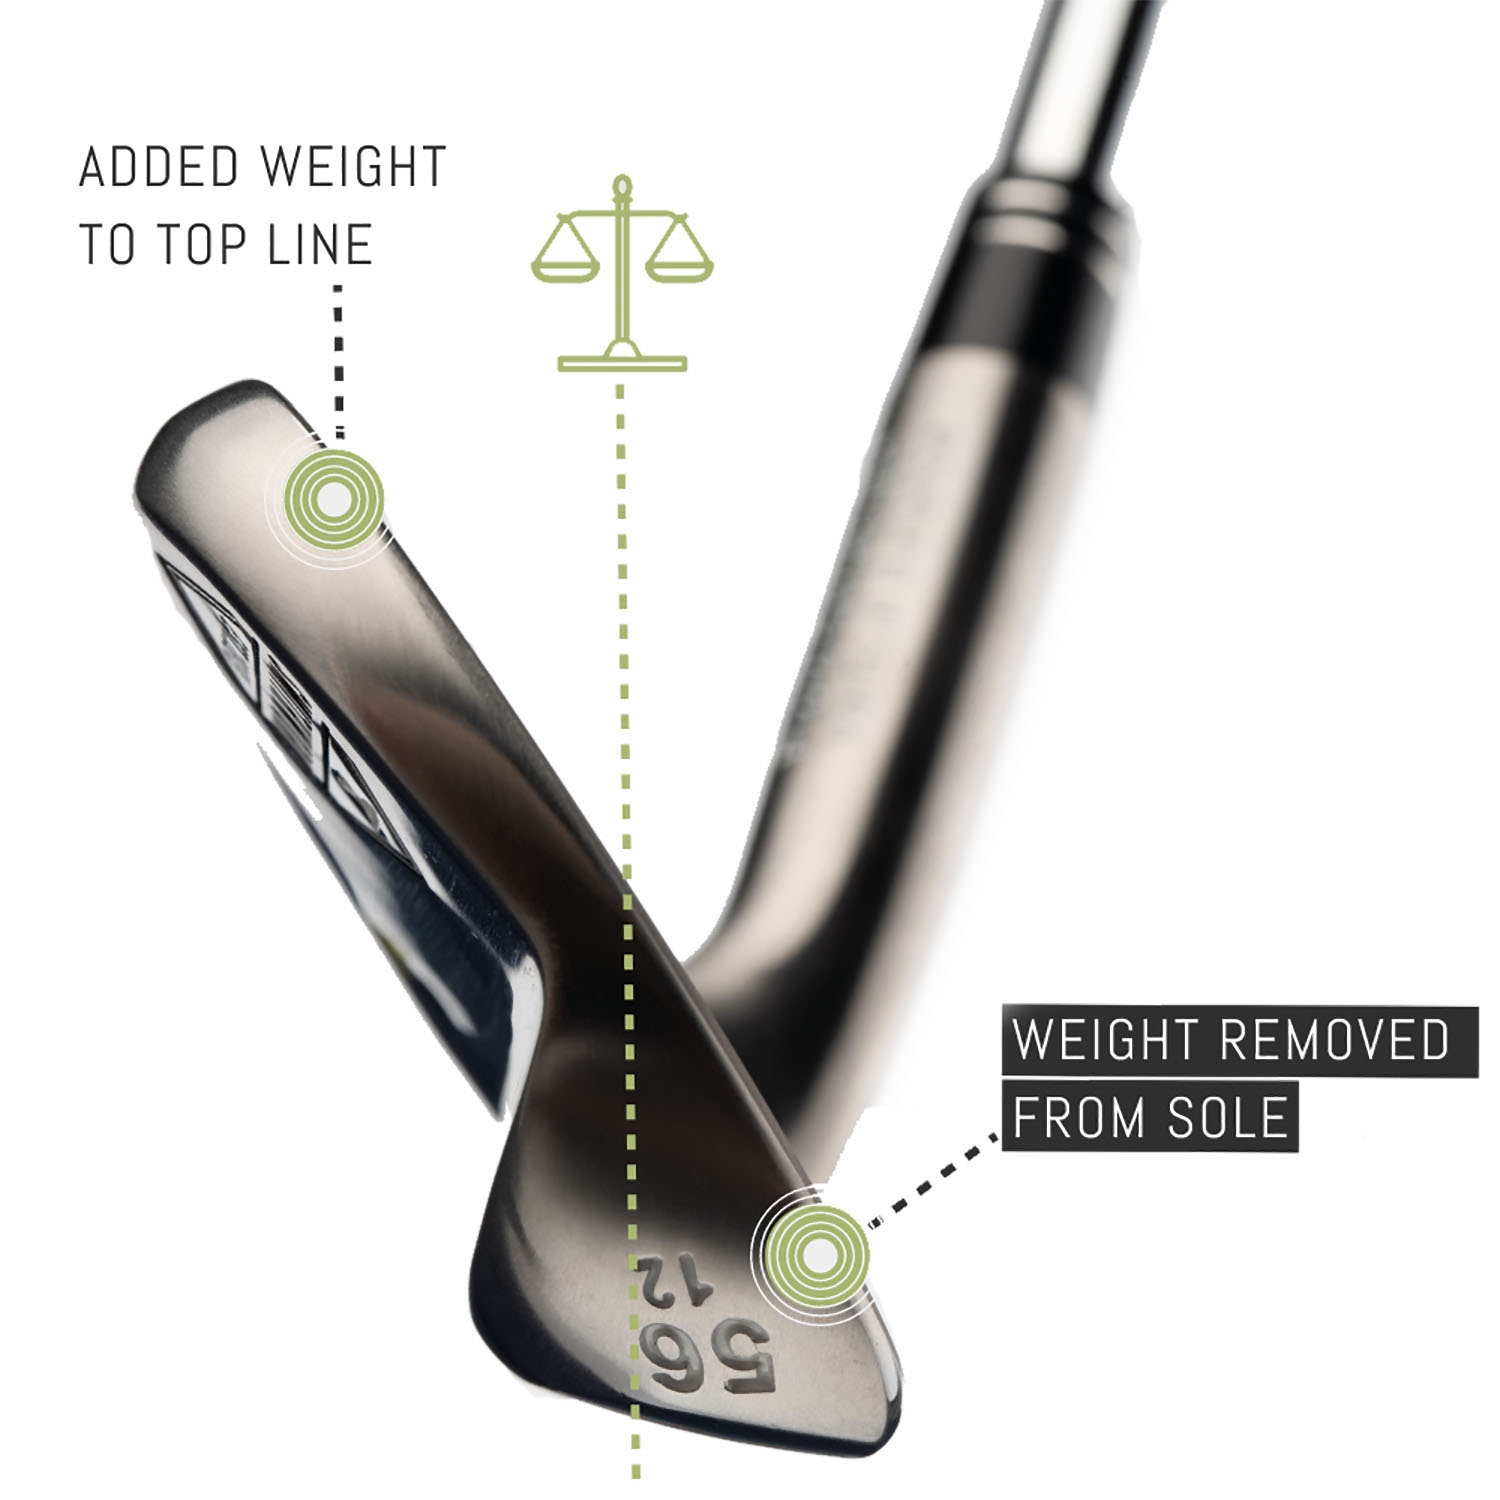 This picture shows the vertical balance technology of SmithWorks wedges